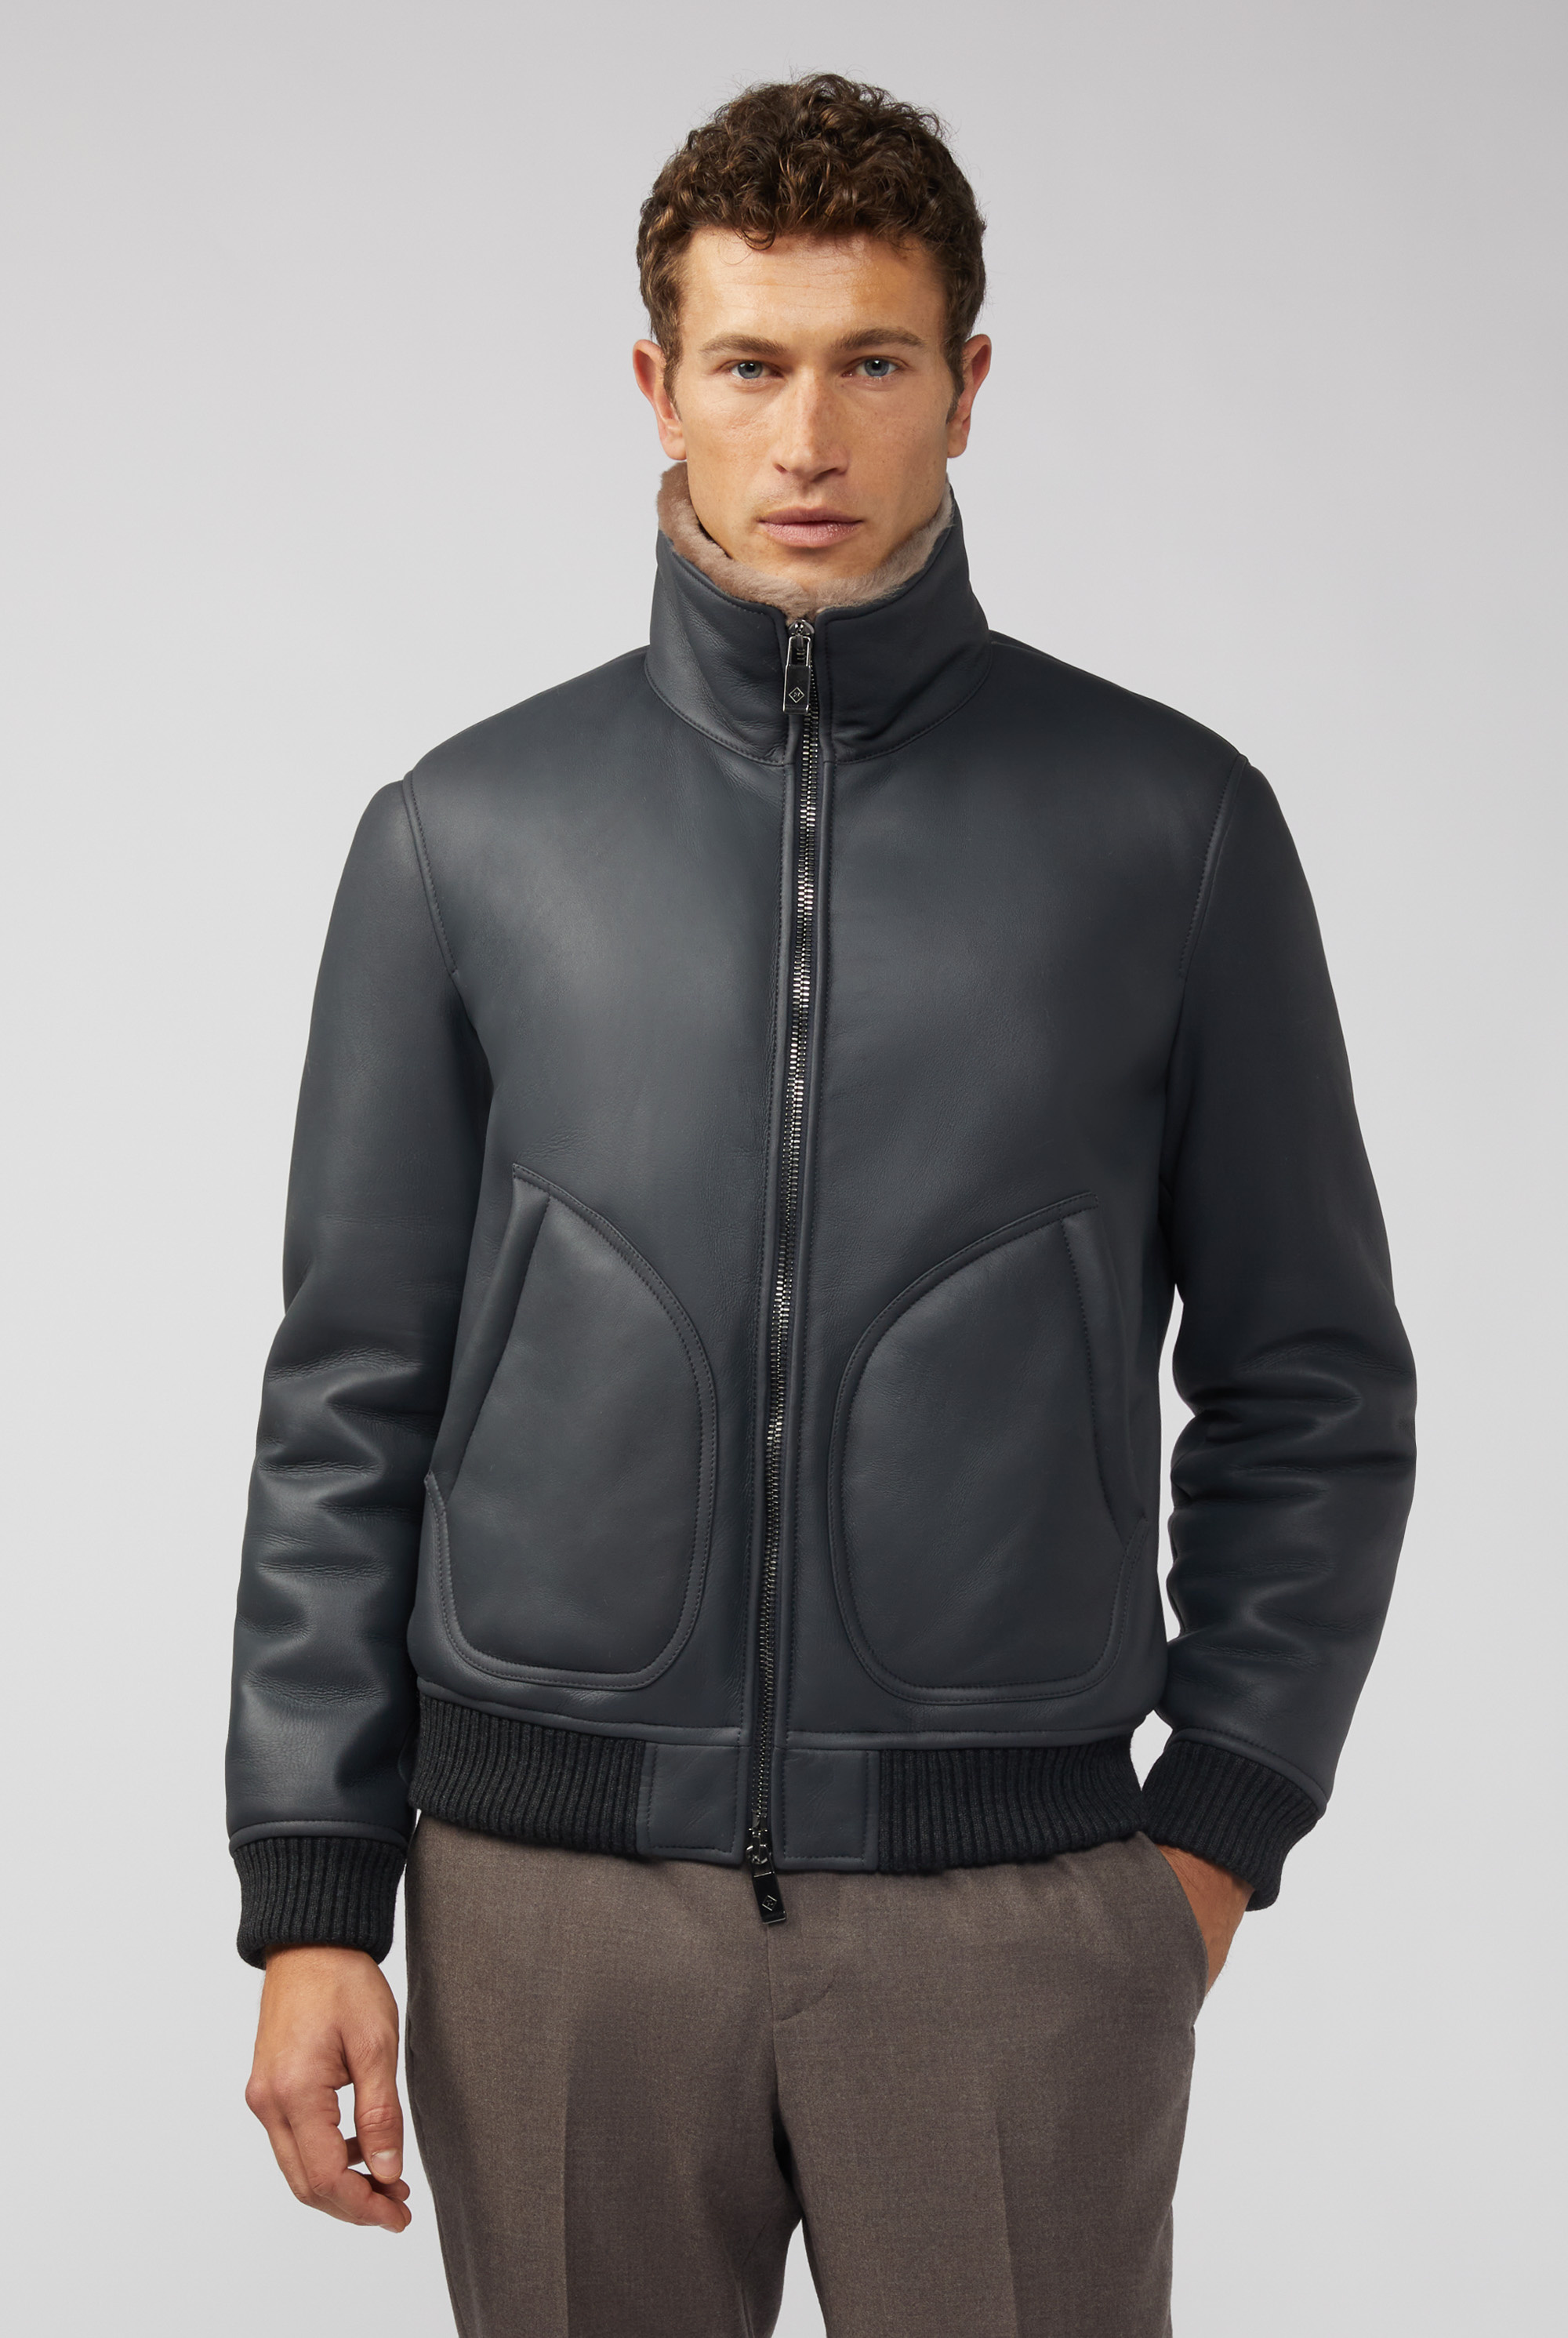 Shearling Bomber Jacket – The Helm Clothing